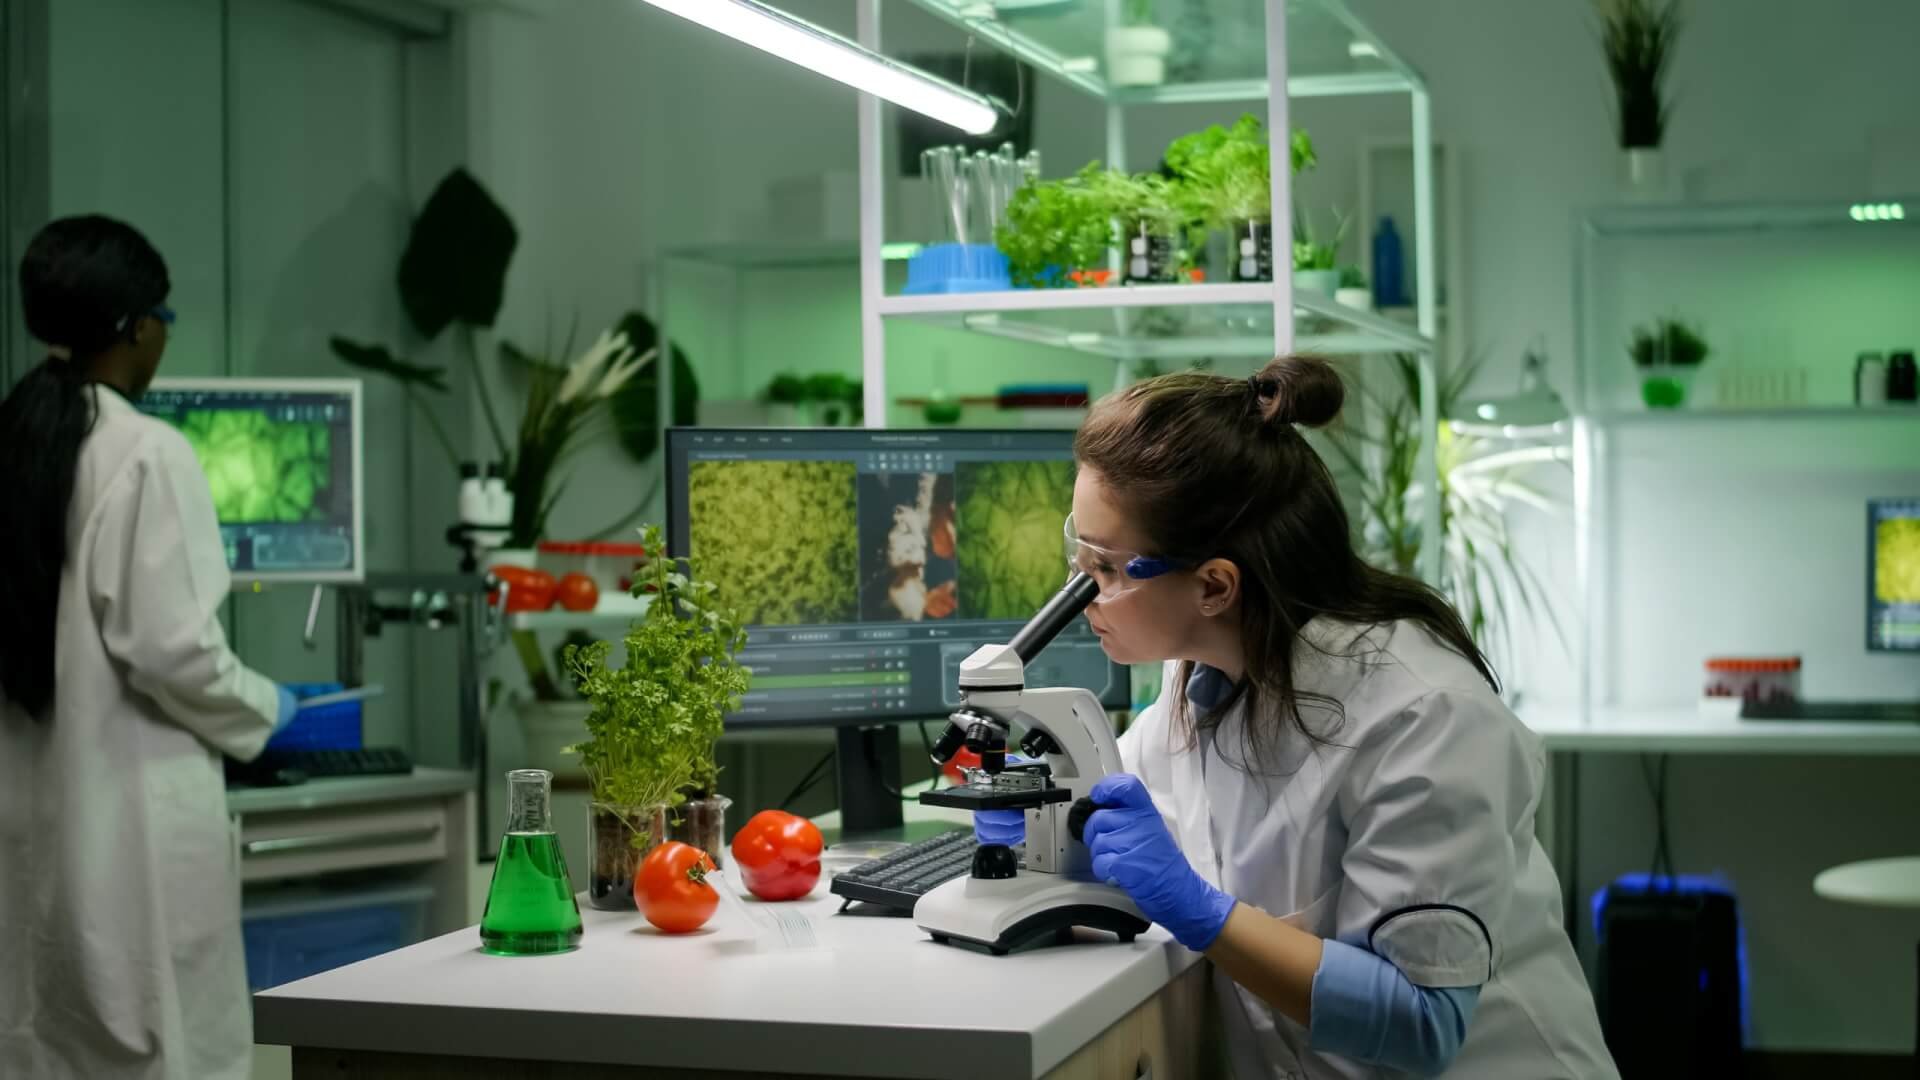 Biologist researcher analyzing biological slide for agriculture expertise using microscope. Chemist scientist examining organic plants in microbiology scientific laboratory